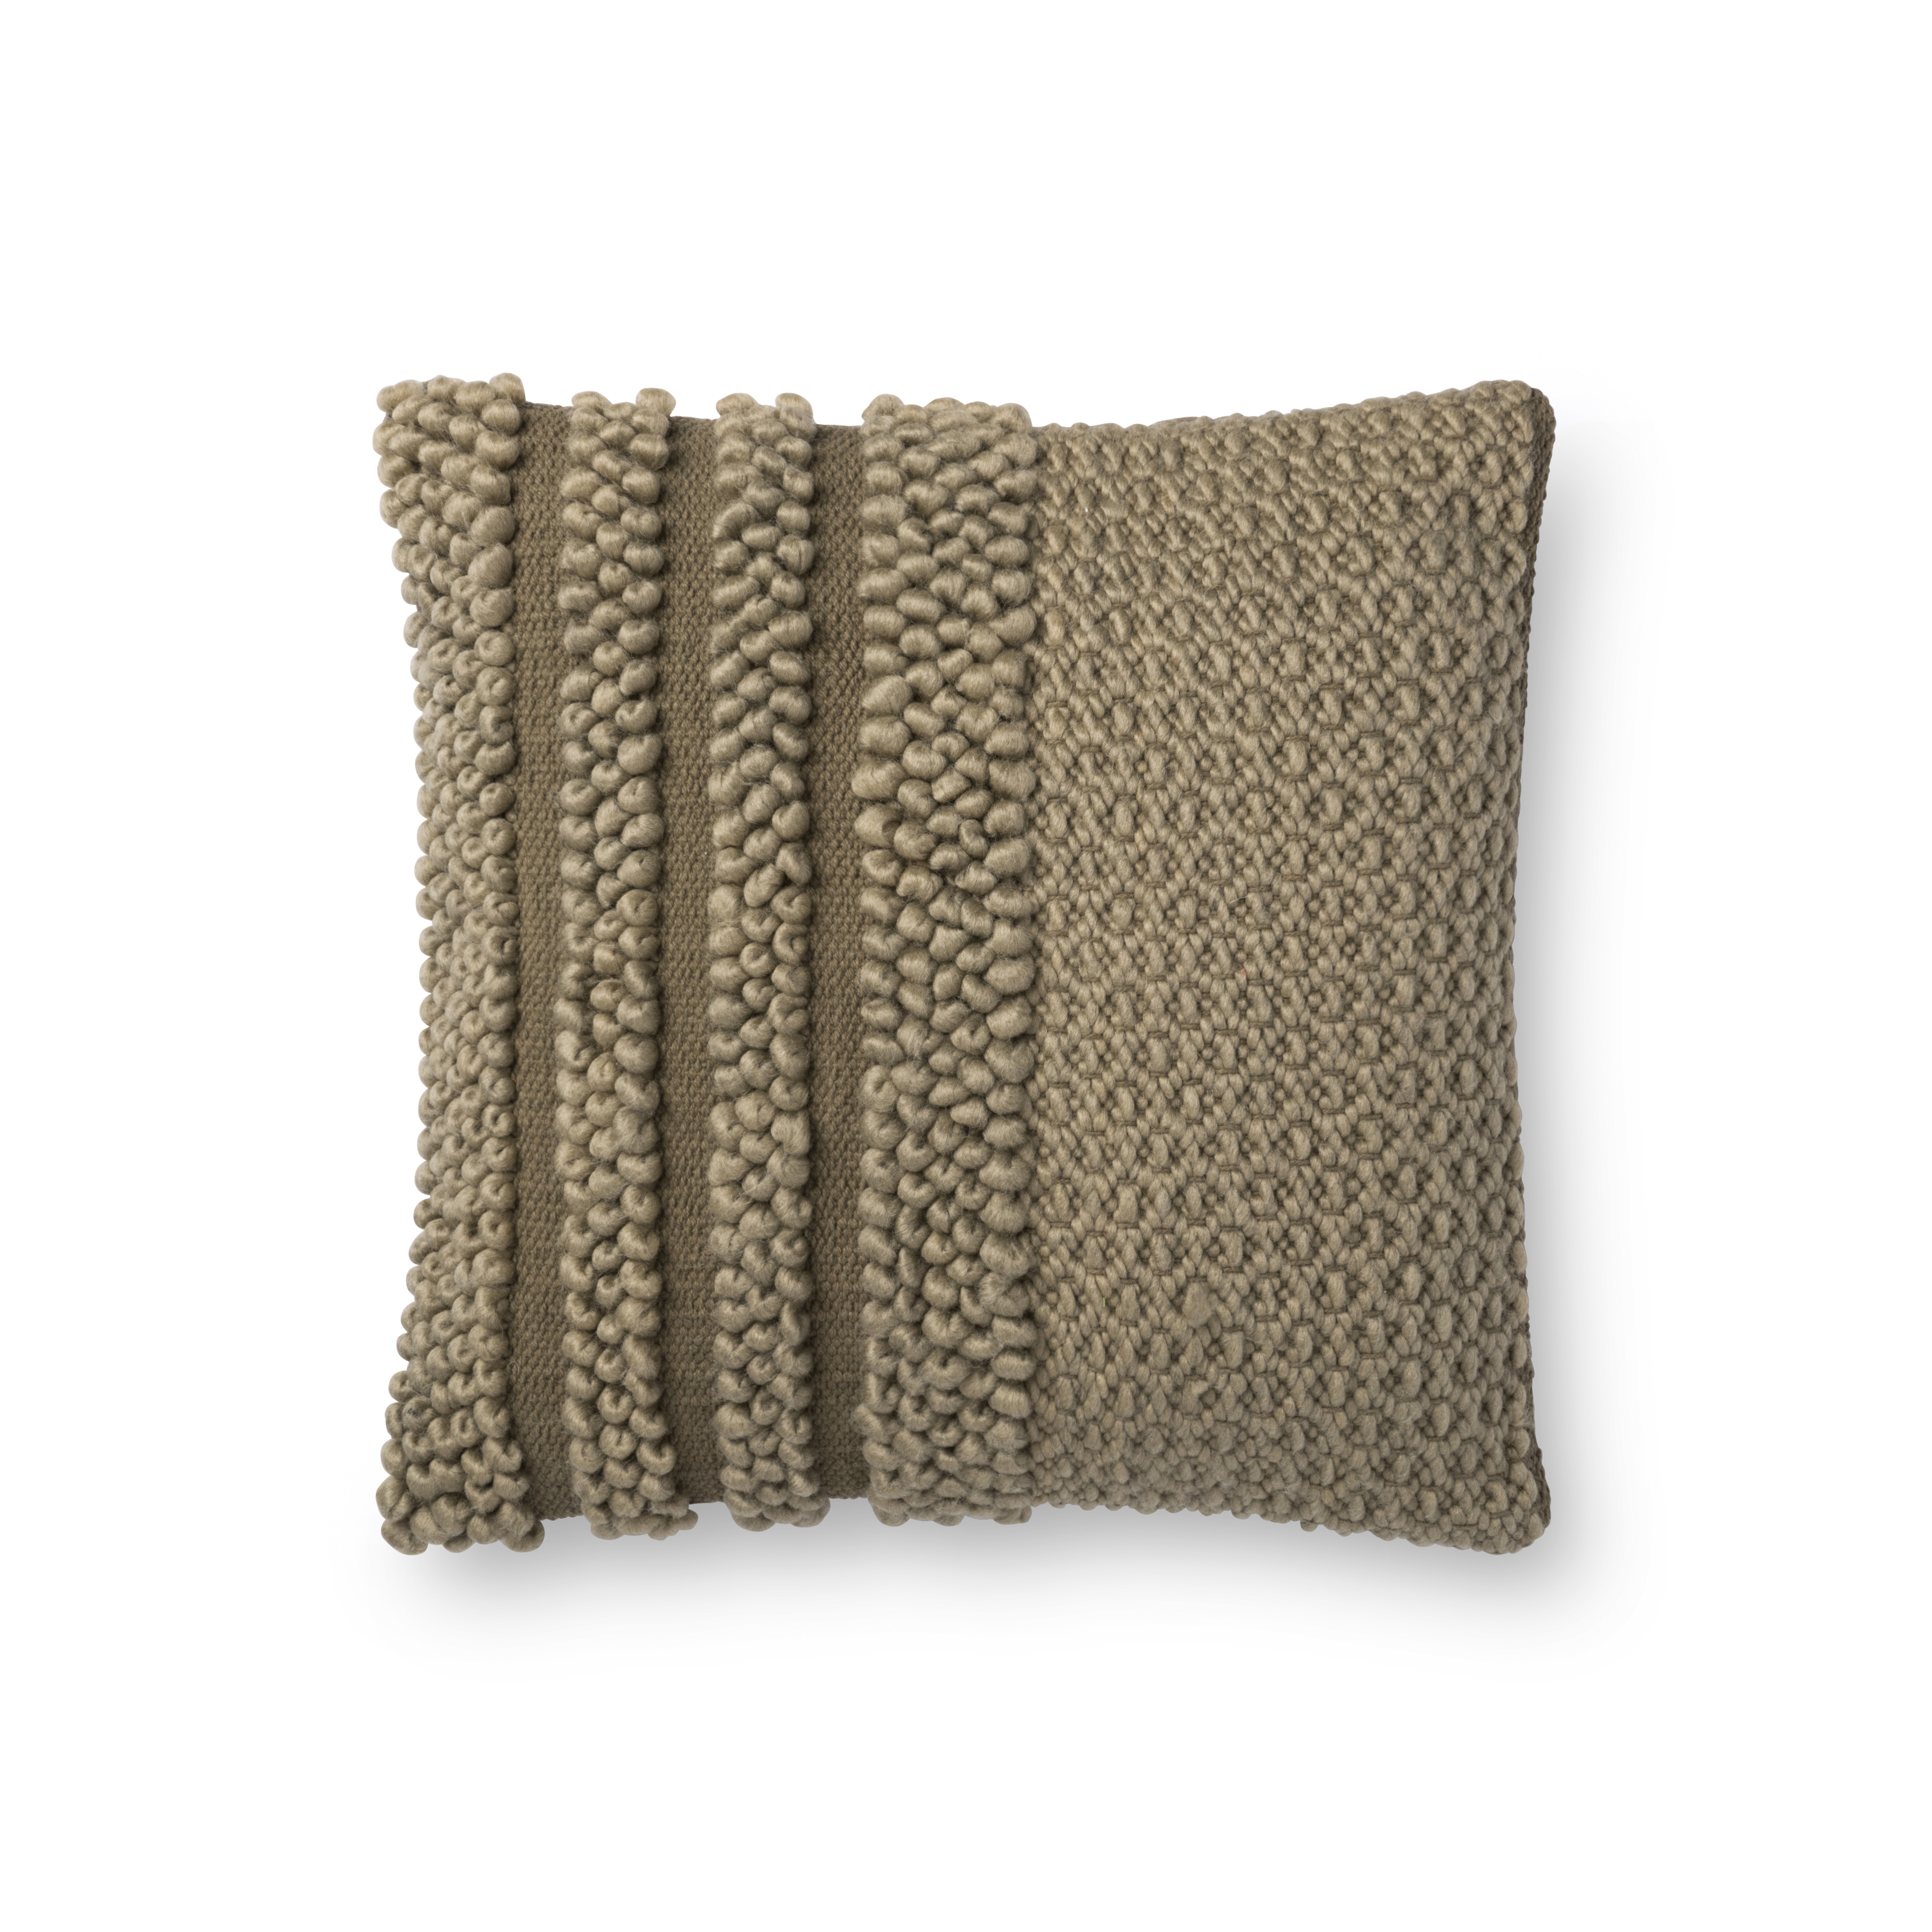 Magnolia Home by Joanna Gaines PILLOWS P1104 OLIVE 18" x 18" Cover w/Down - Magnolia Home by Joana Gaines Crafted by Loloi Rugs